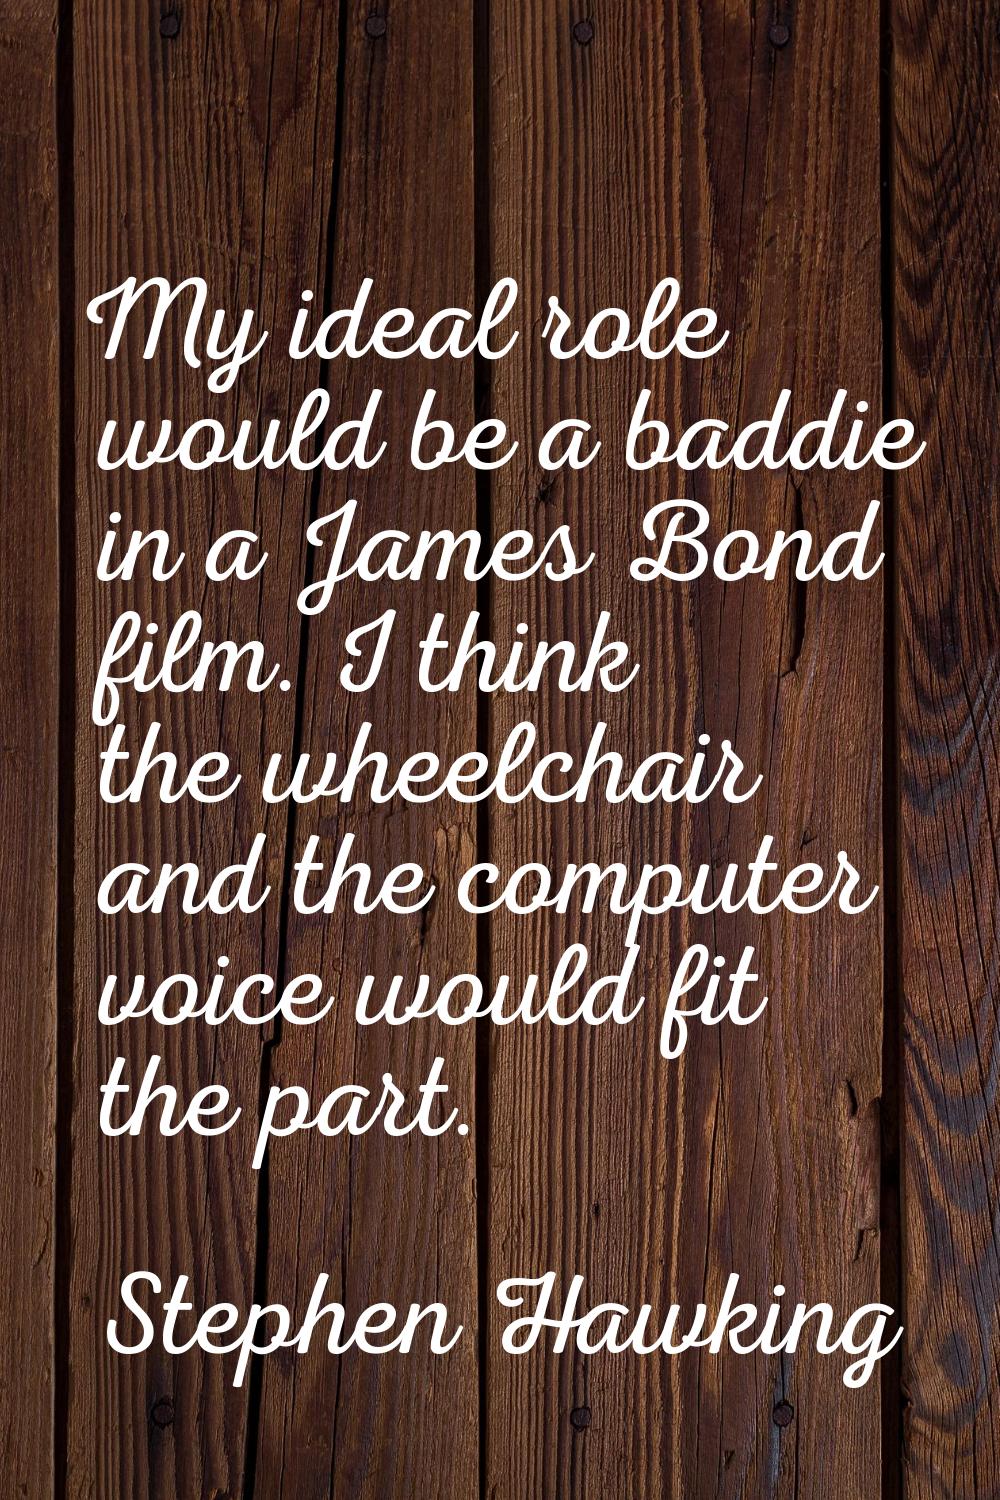 My ideal role would be a baddie in a James Bond film. I think the wheelchair and the computer voice